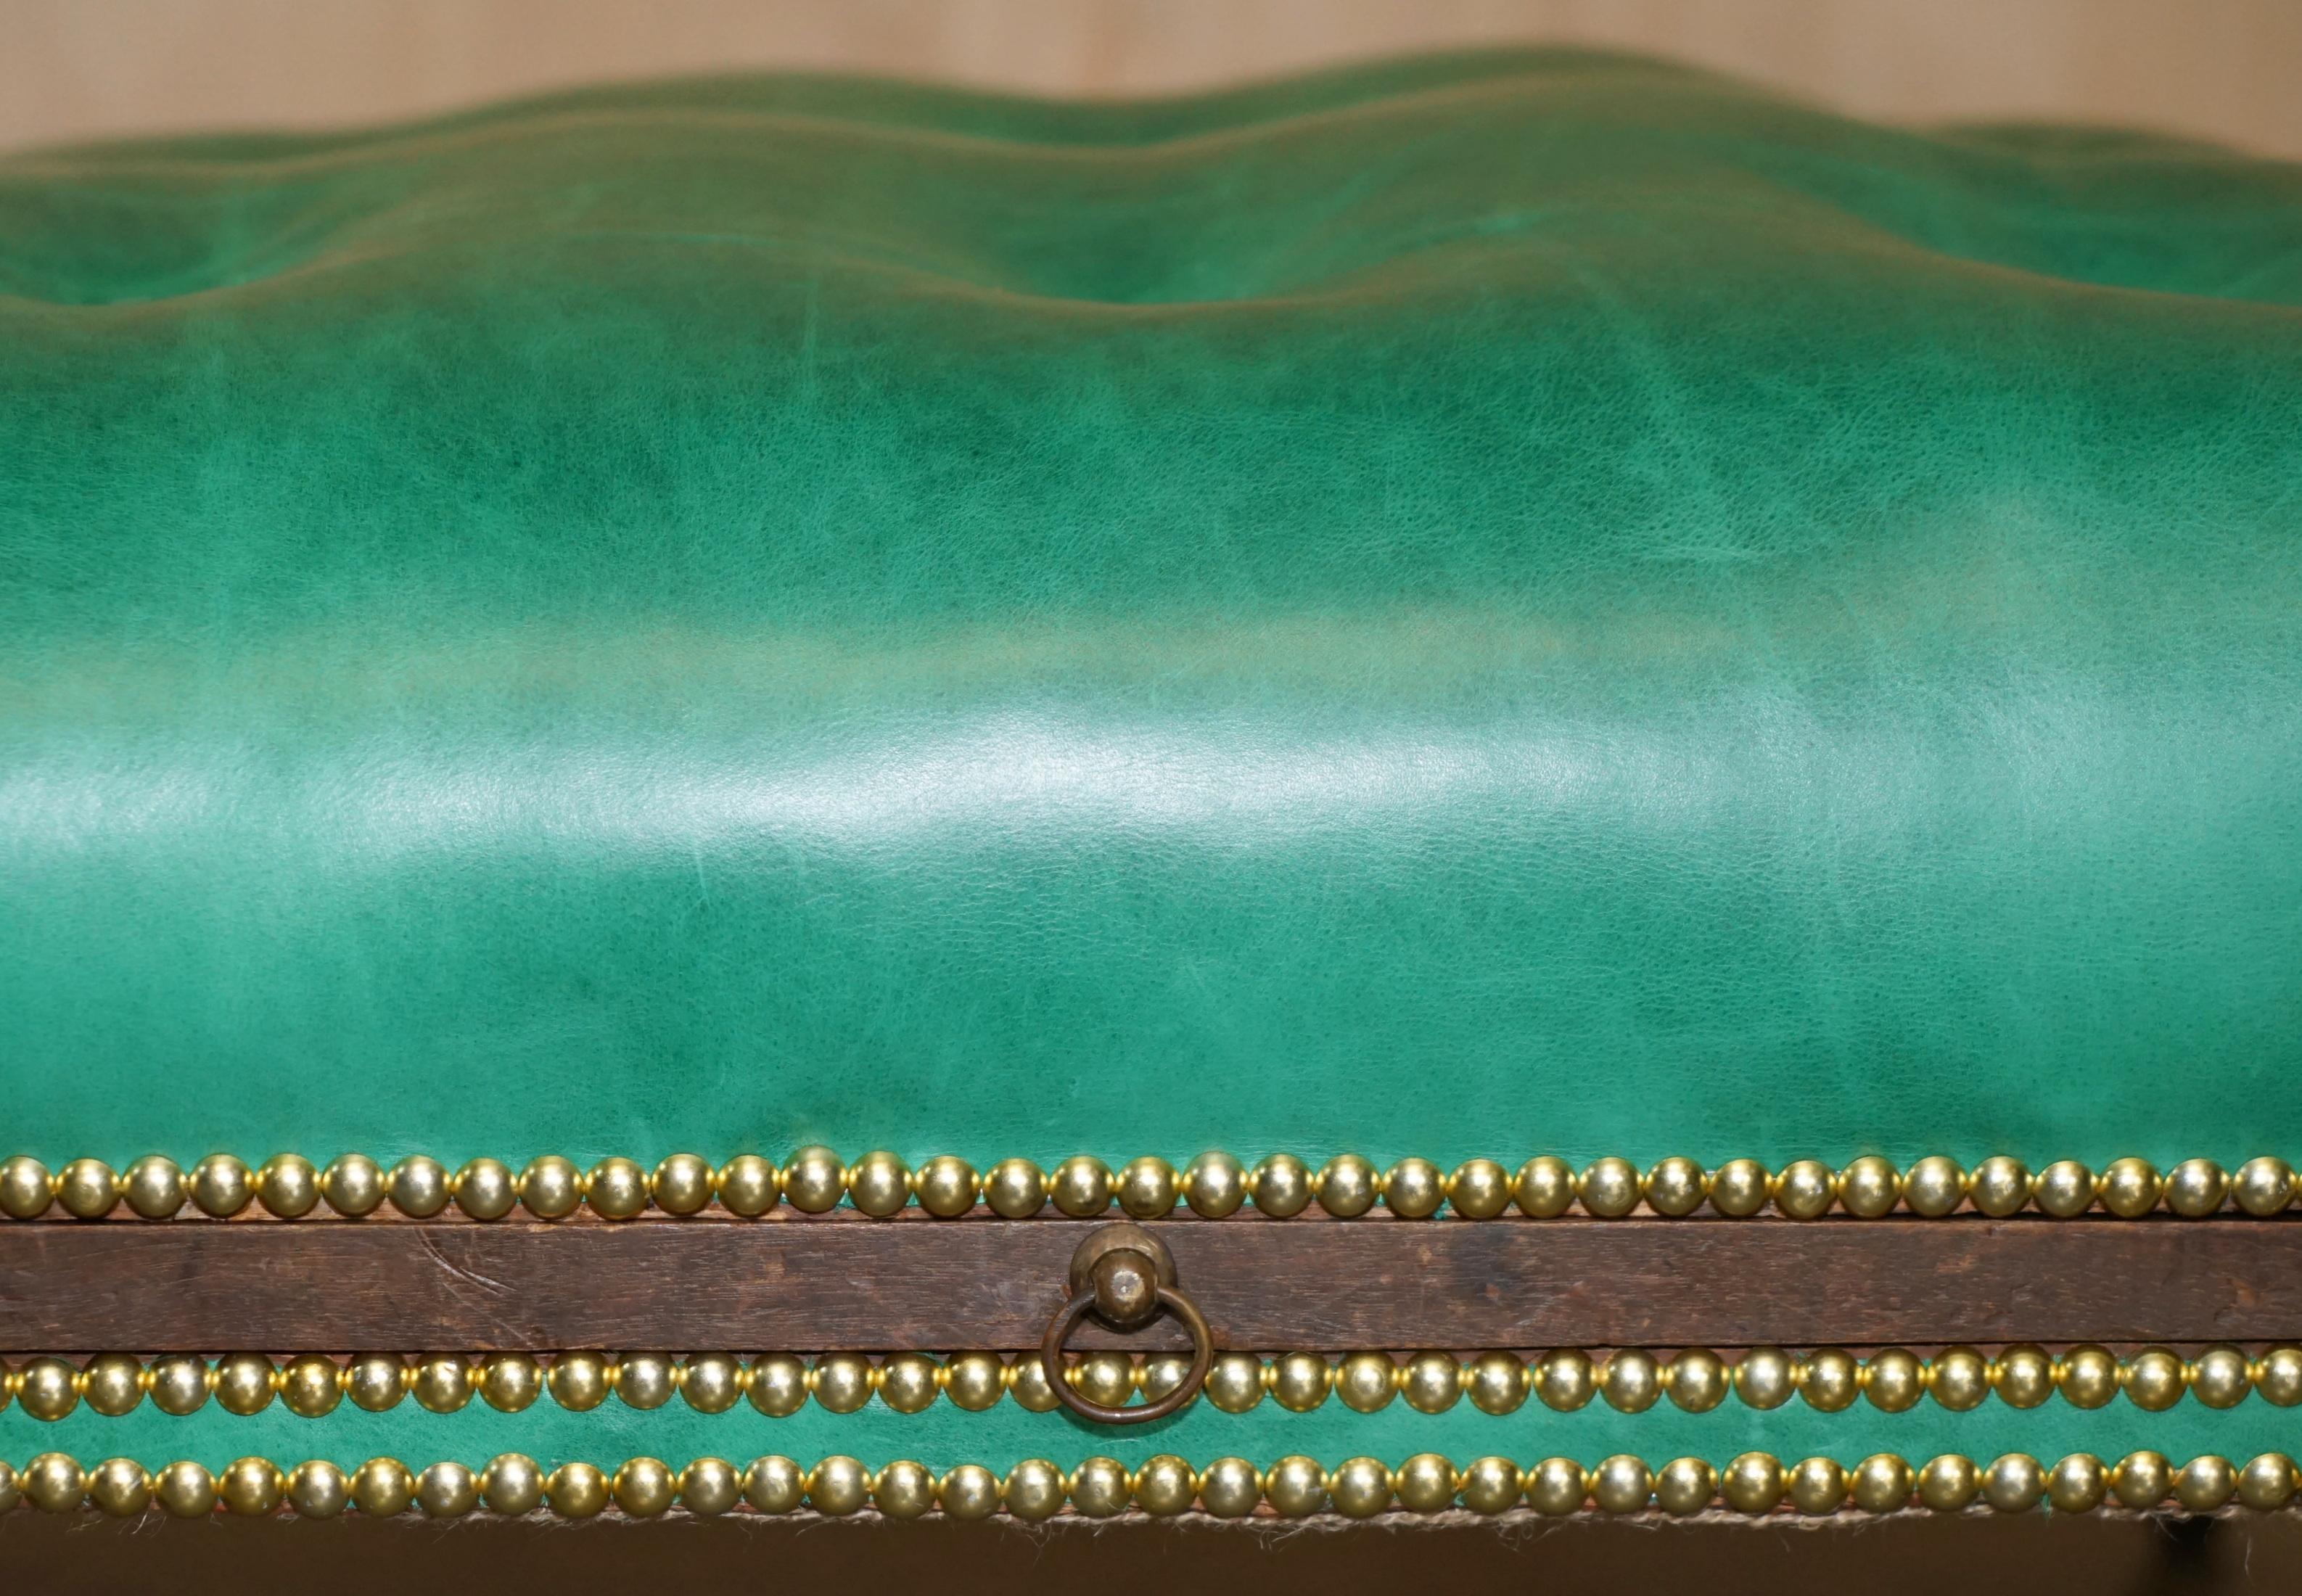 RARE ANTIQUE GEORGIAN 1760 CHESTERFIELD LEATHER FOOTSTOOL WiTH SLIP SERVING TRAY For Sale 1